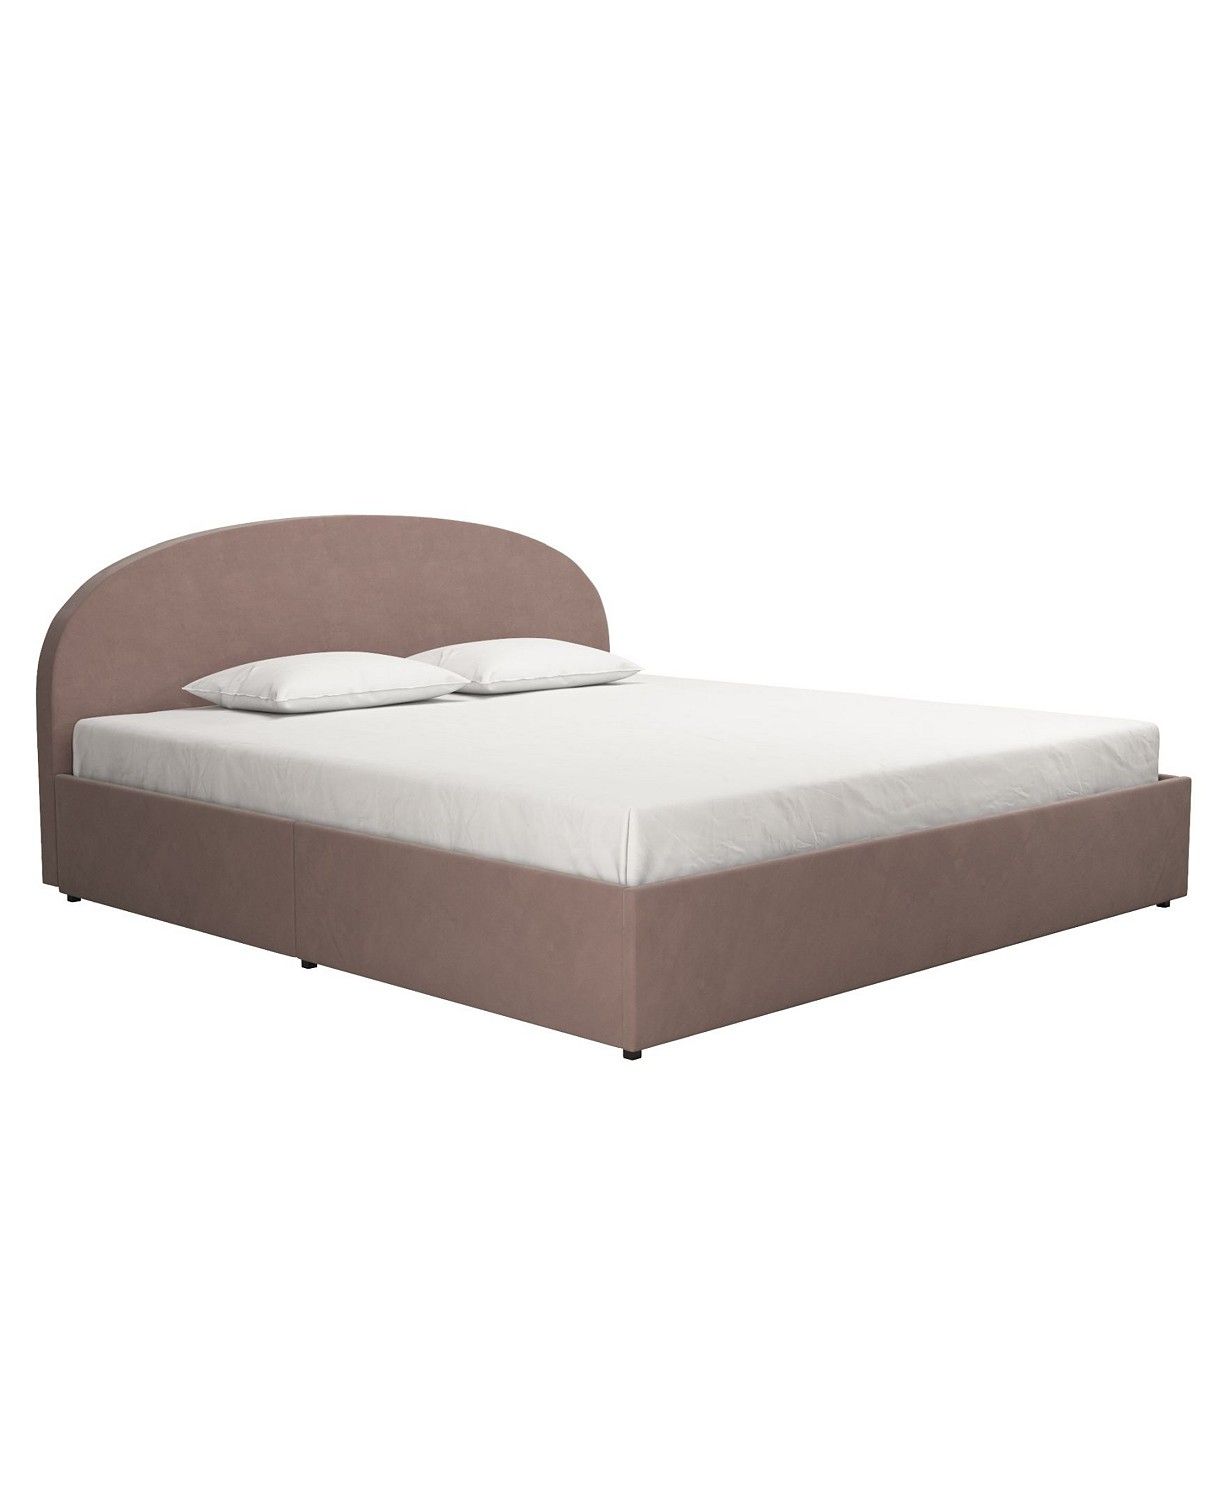 Mr. Kate Moon Upholstered Bed with Storage, King & Reviews - Furniture - Macy's | Macys (US)